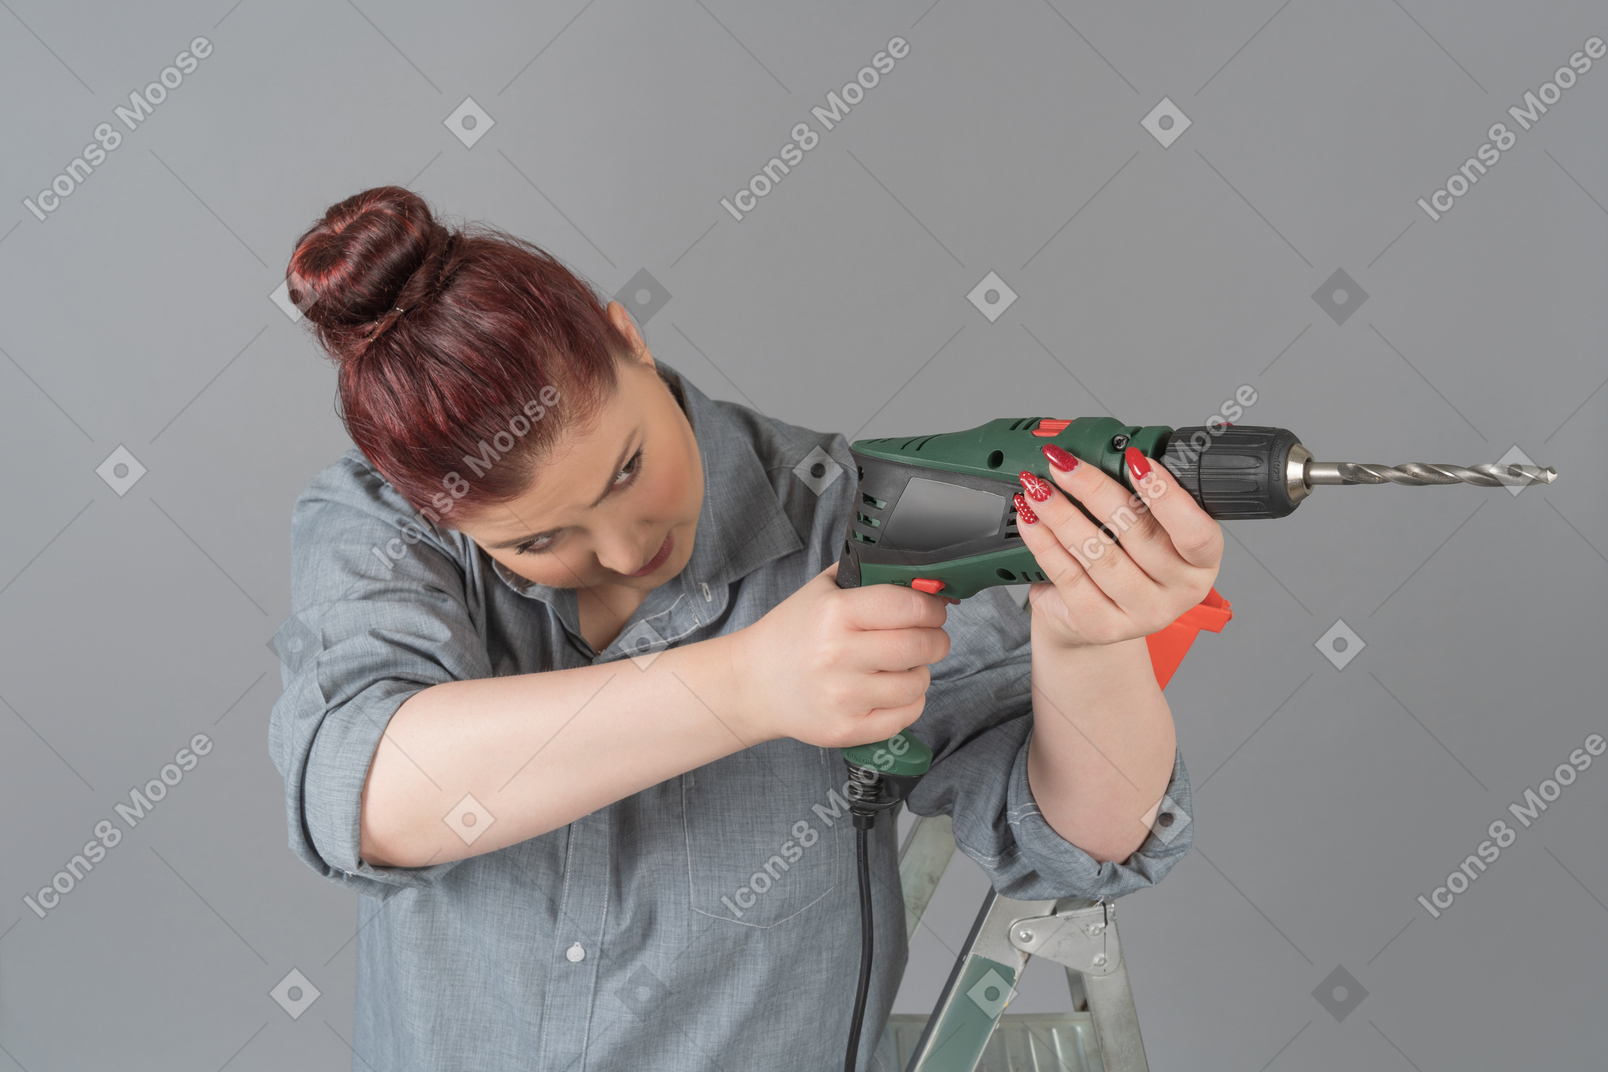 Concentrated woman aiming with a drill